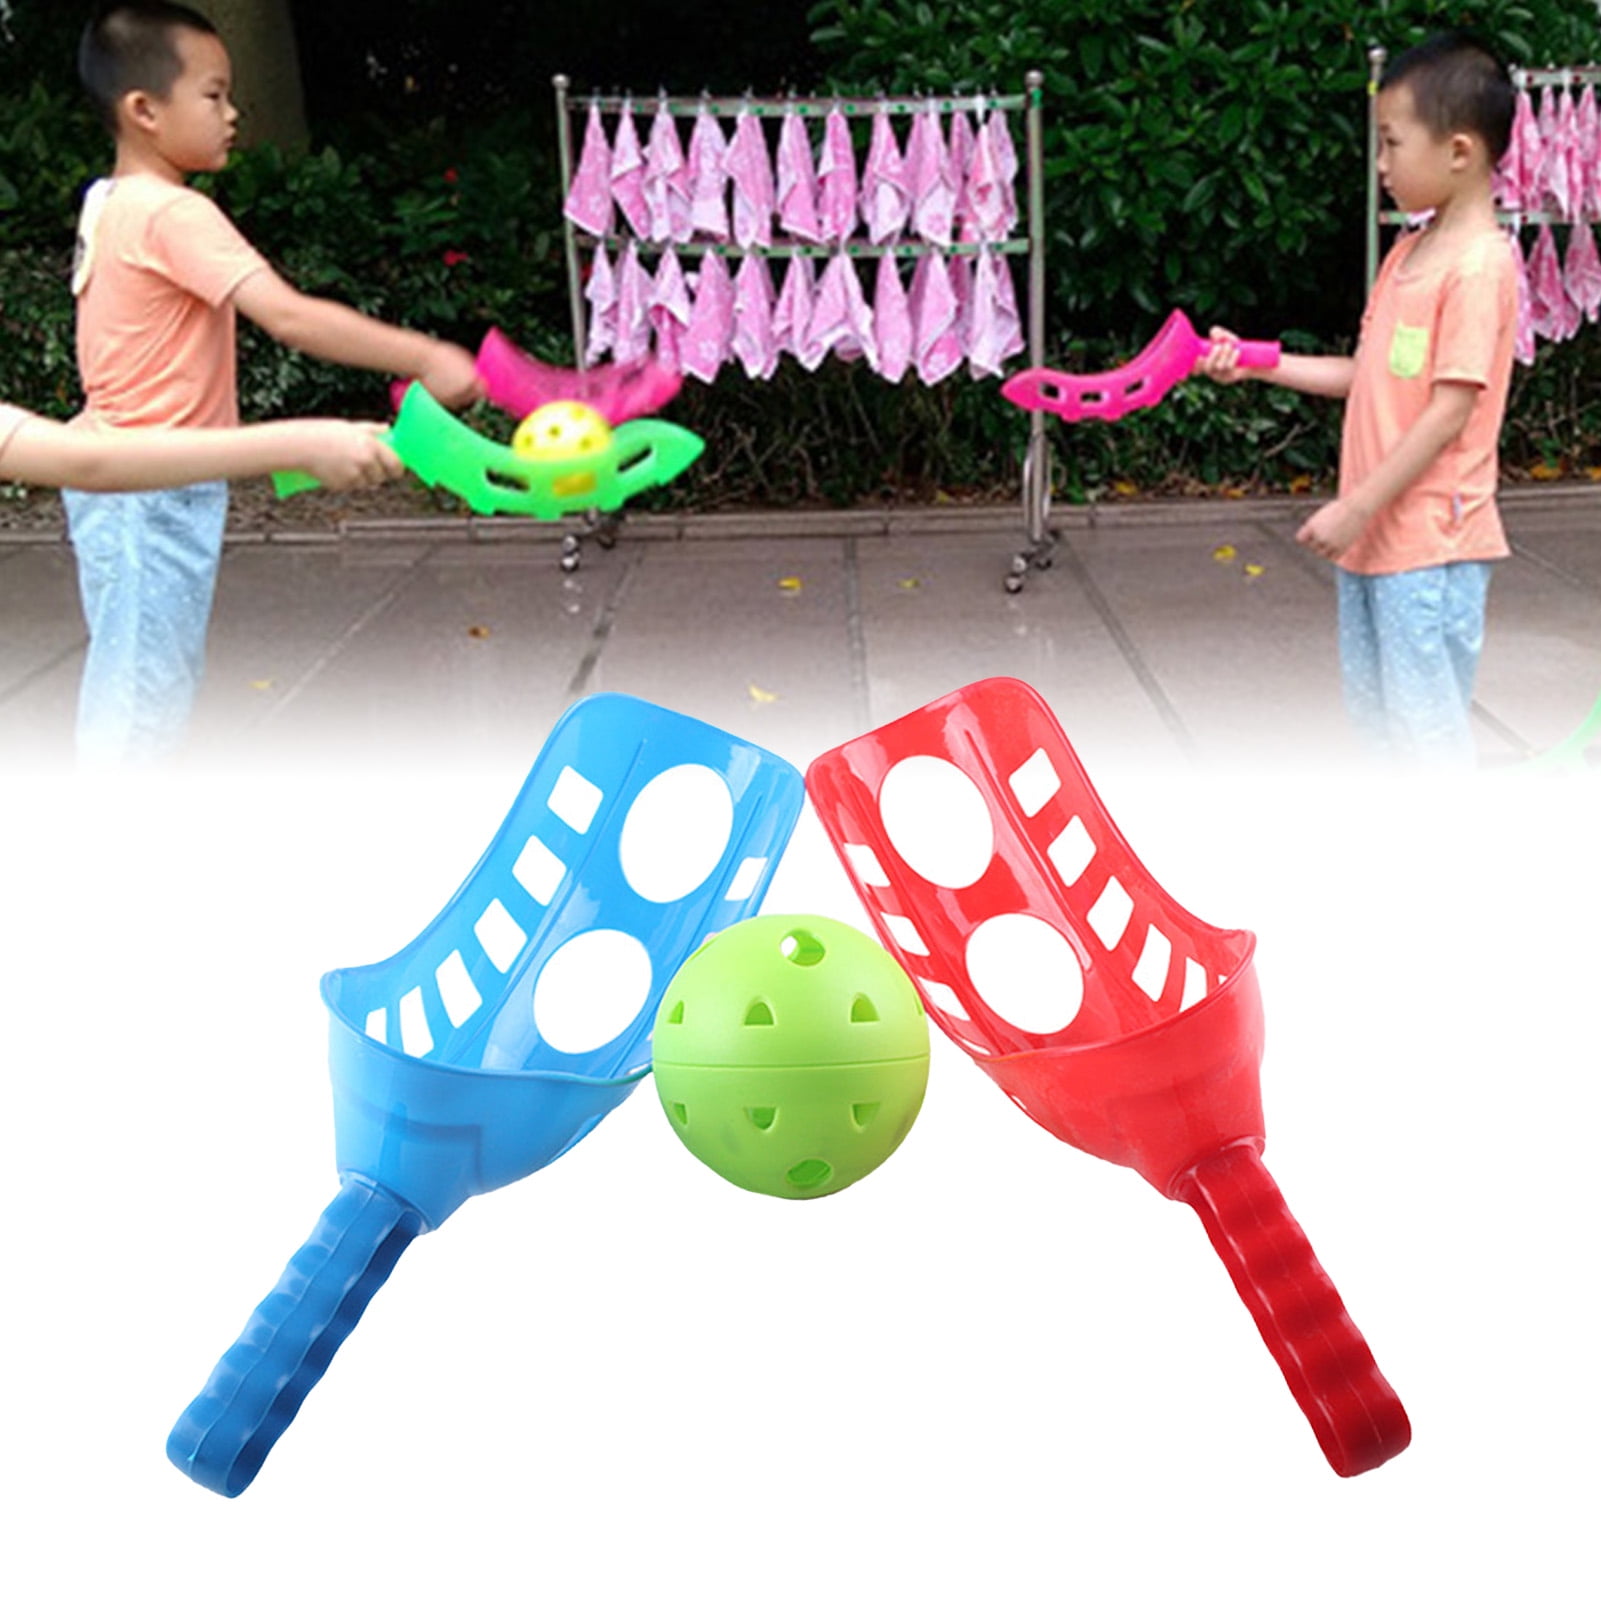 Ball Launch and Catch Ball Double Play Toss Game Set Outdoor Backyard Activity 